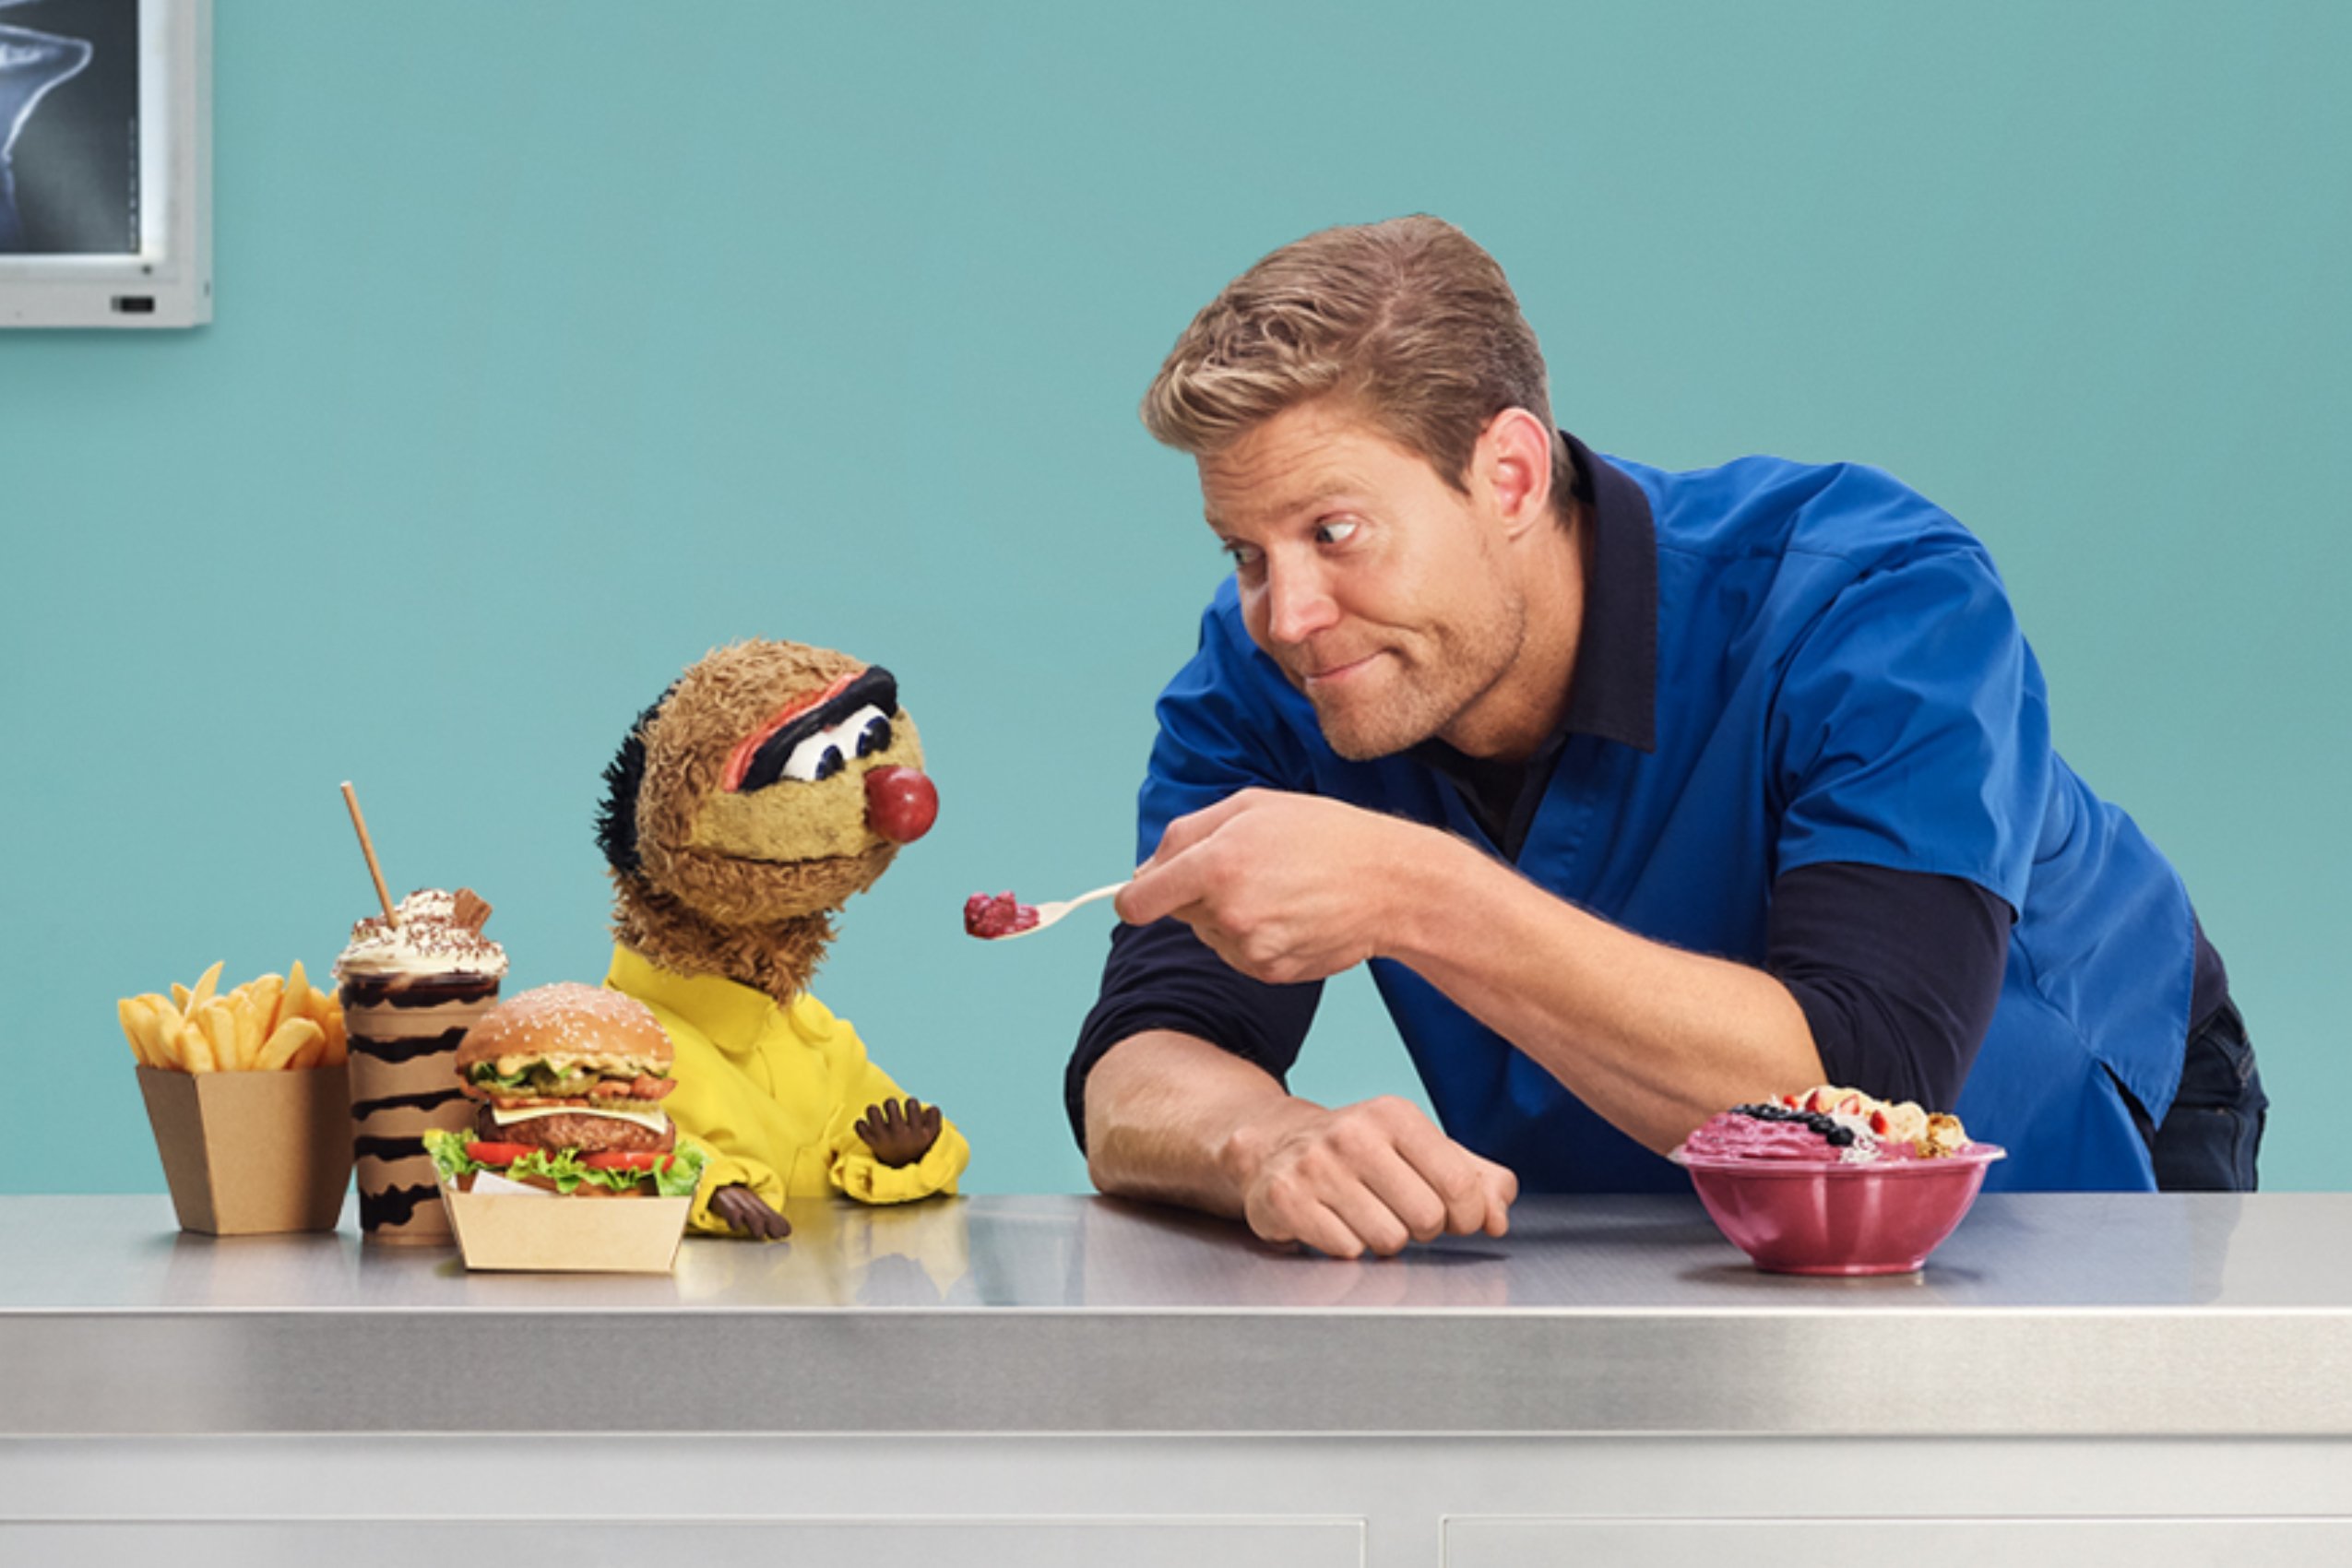 Uber Is Campaigning To Get Literal Puppet Agro On I’m A Celeb & Sure, Why Not At This Point